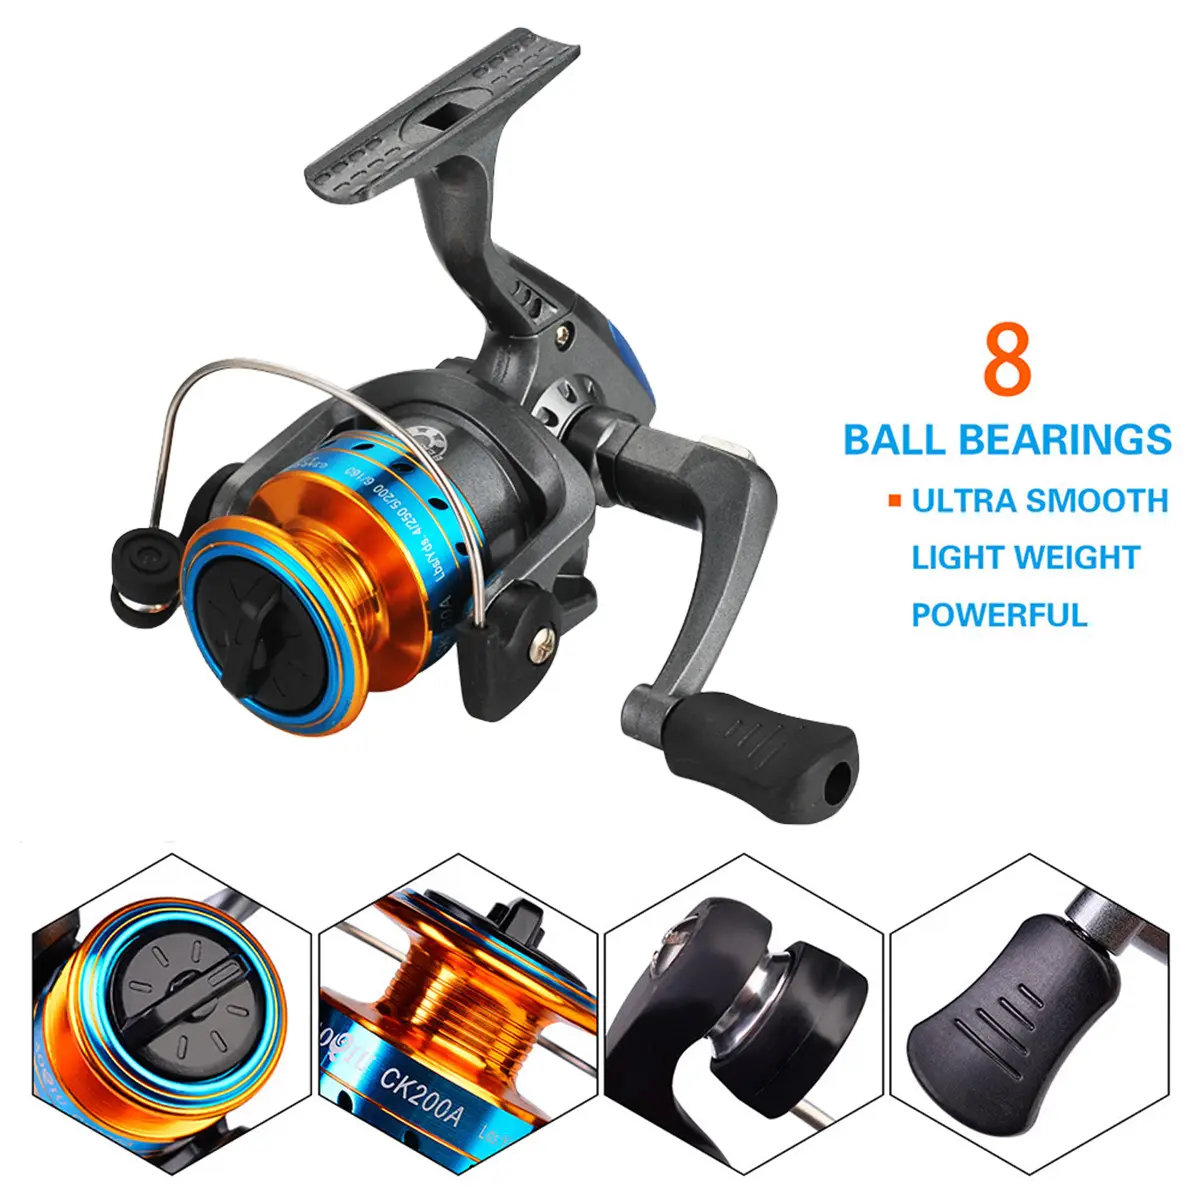 Hot Selling Quality Outdoor 1.7M Iure Rod Set Fishing Rod And CK200 Fishing Reel Line Fishing Tool Combo